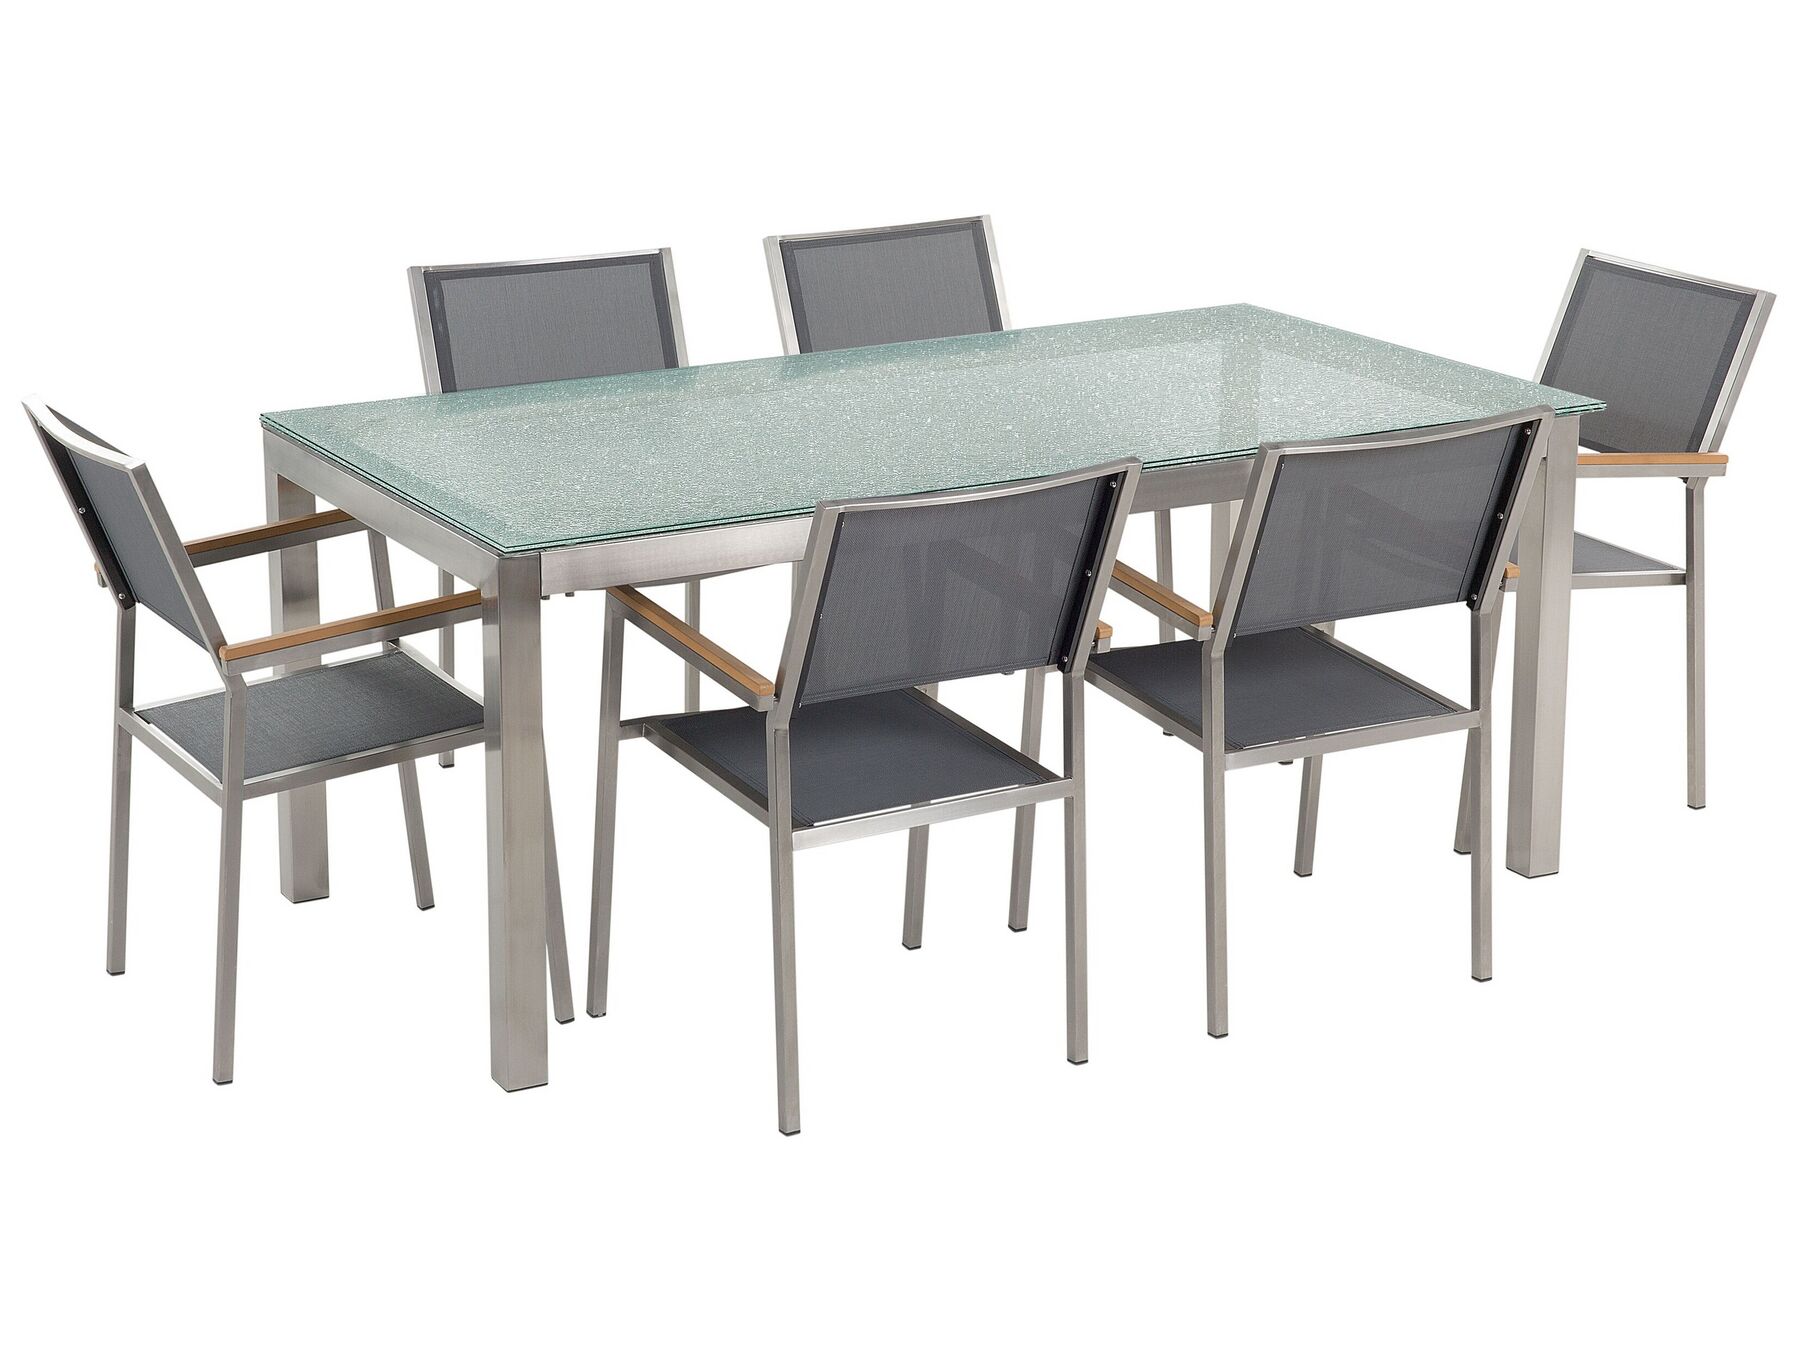  6 Seater Garden Dining Set Glass Table with Grey Chairs GROSSETO_725164